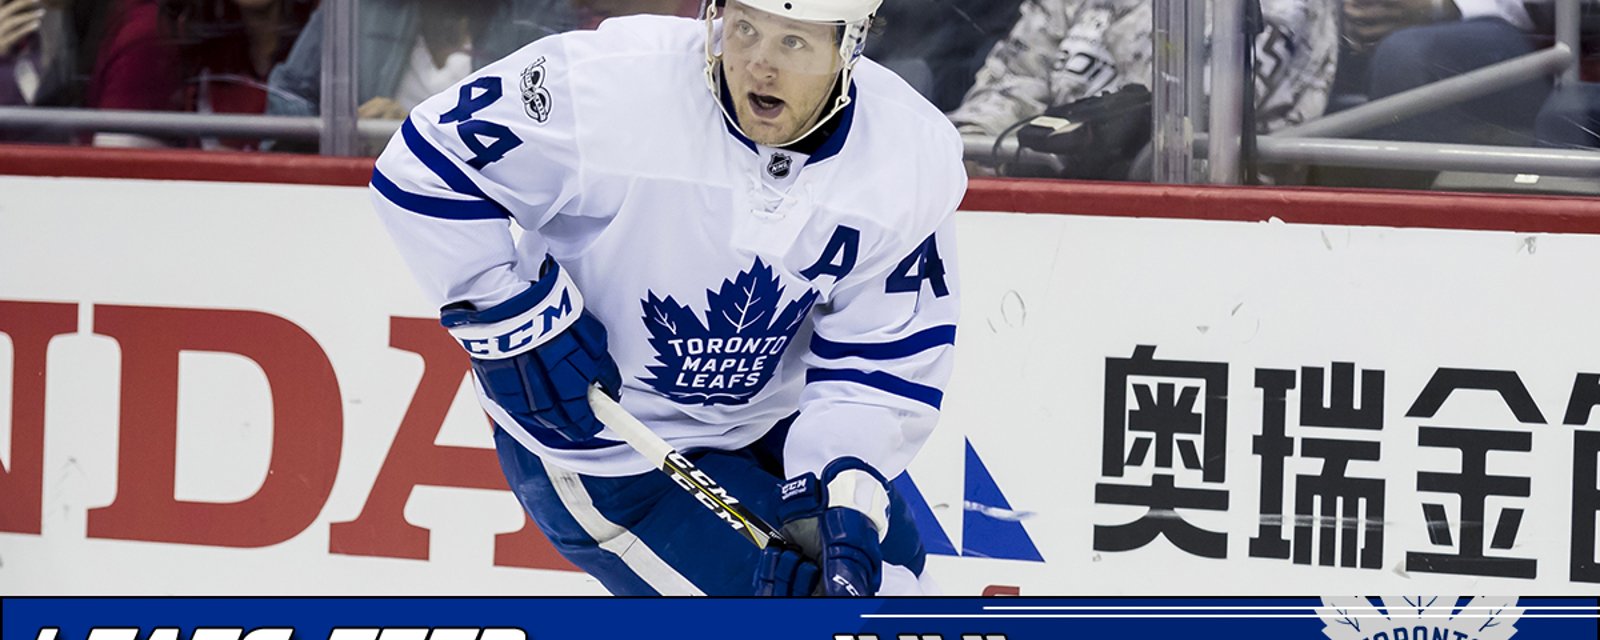 Morgan Rielly is playing the best hockey of his career so far this season!